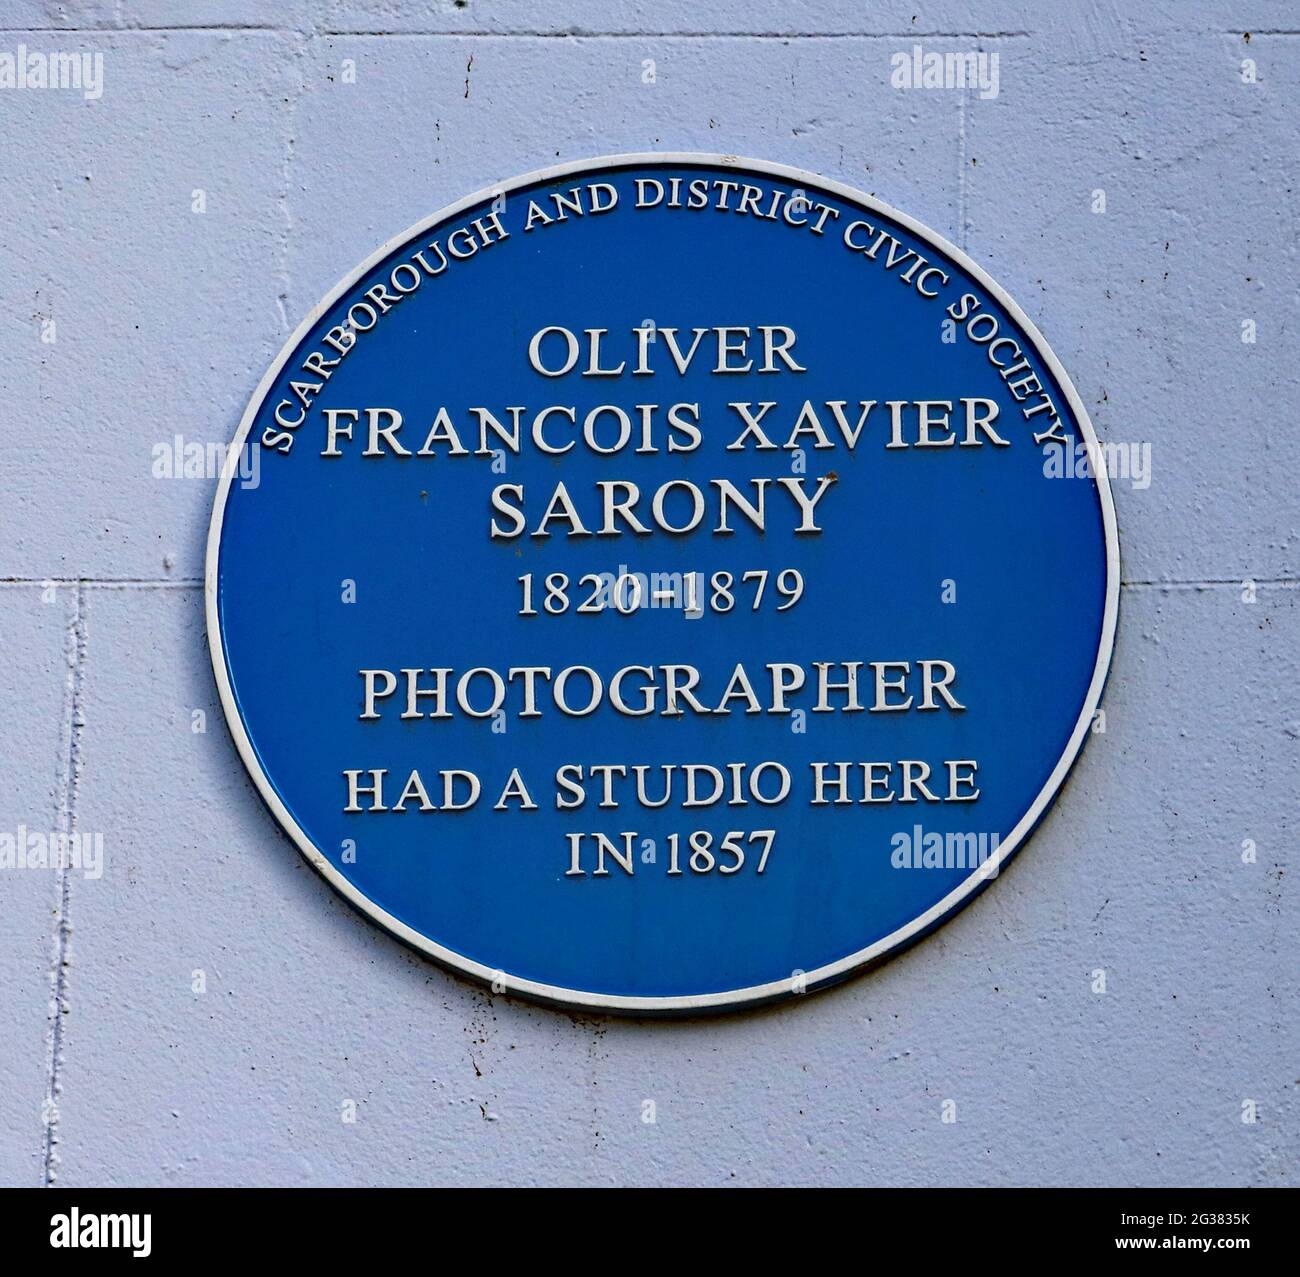 Blue plaque for Oliver Francois Xavier Sarony at Fairview Court Scarborough, recording where the photographer had a studio in the 1800’s. Stock Photo